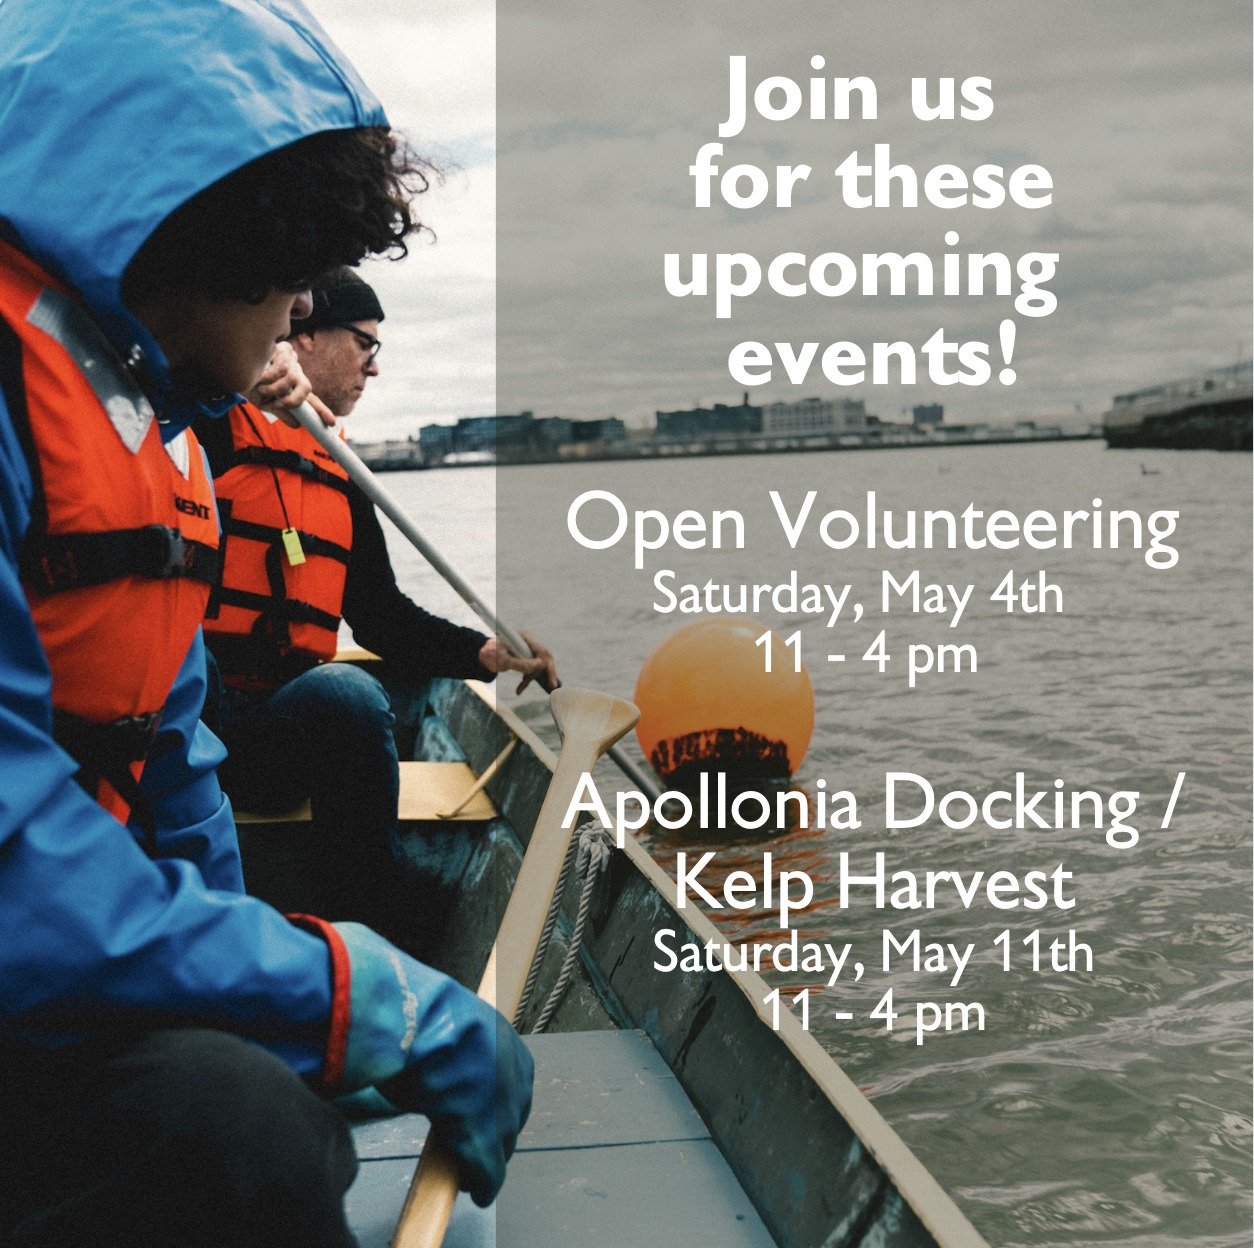 Want to volunteer with RETI Center? Join us and get your hands dirty during our upcoming events!

Open Volunteering - Saturday, May 4th. From 11am to 4pm

@schooner_apollonia is docking at the field station on the day of our kelp harvest! - Saturday,